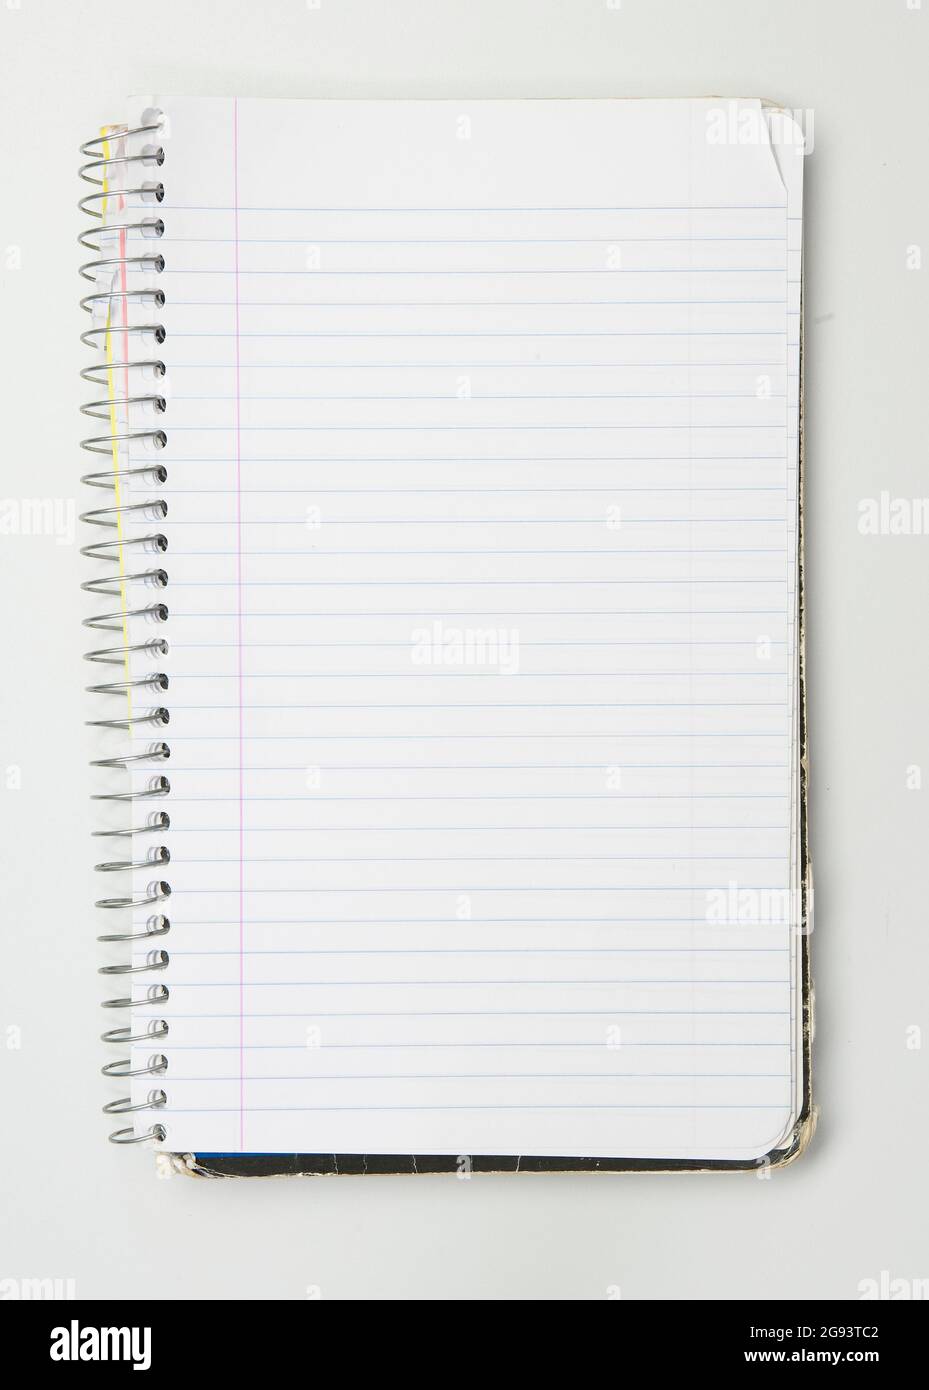 A worn used wire bound notebook opened to a blank lined page Stock Photo